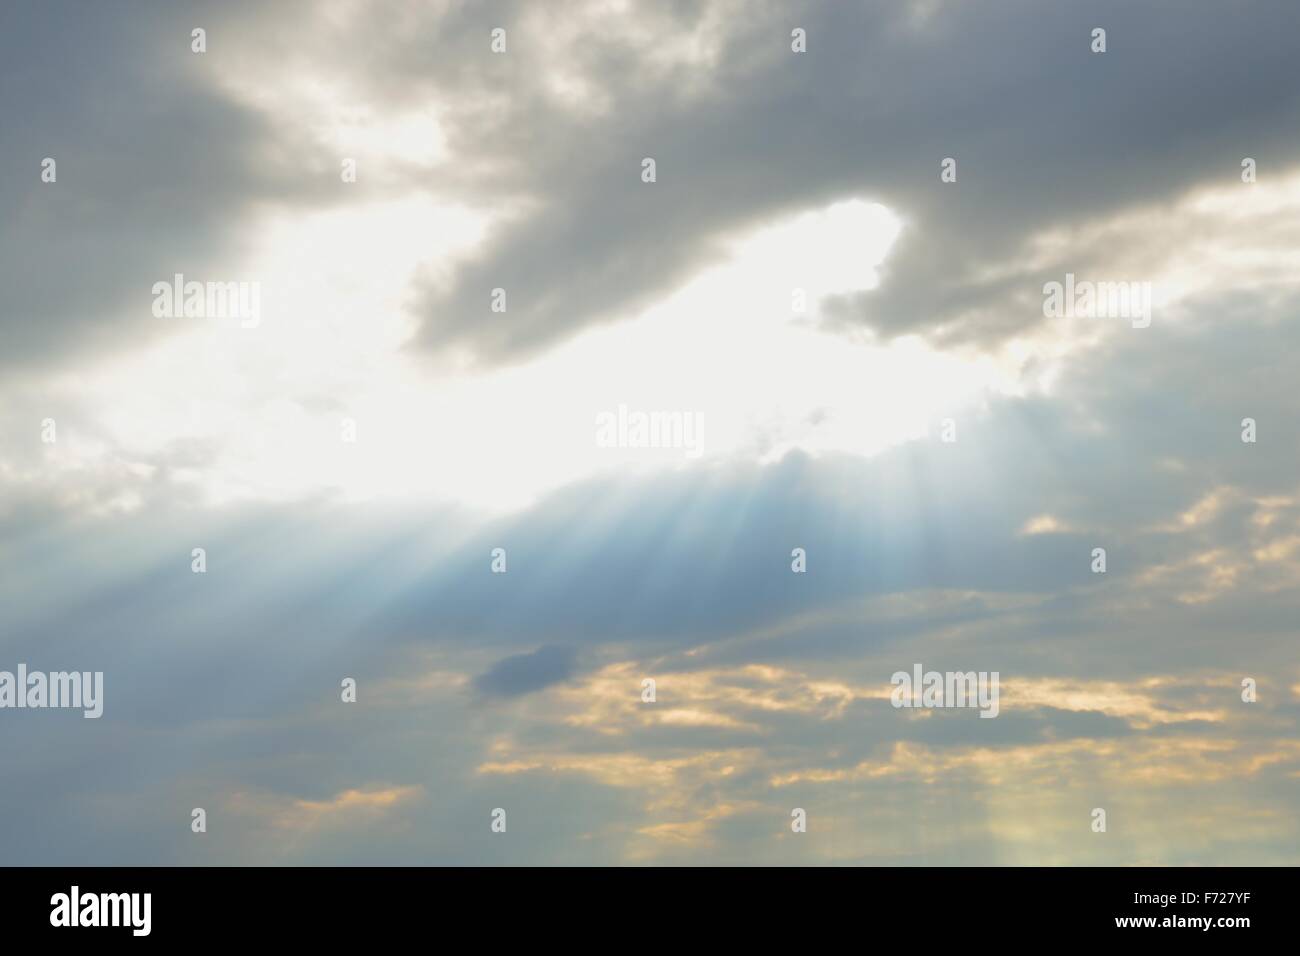 An amazing cloudy sky with light rays and beams of light. Stock Photo